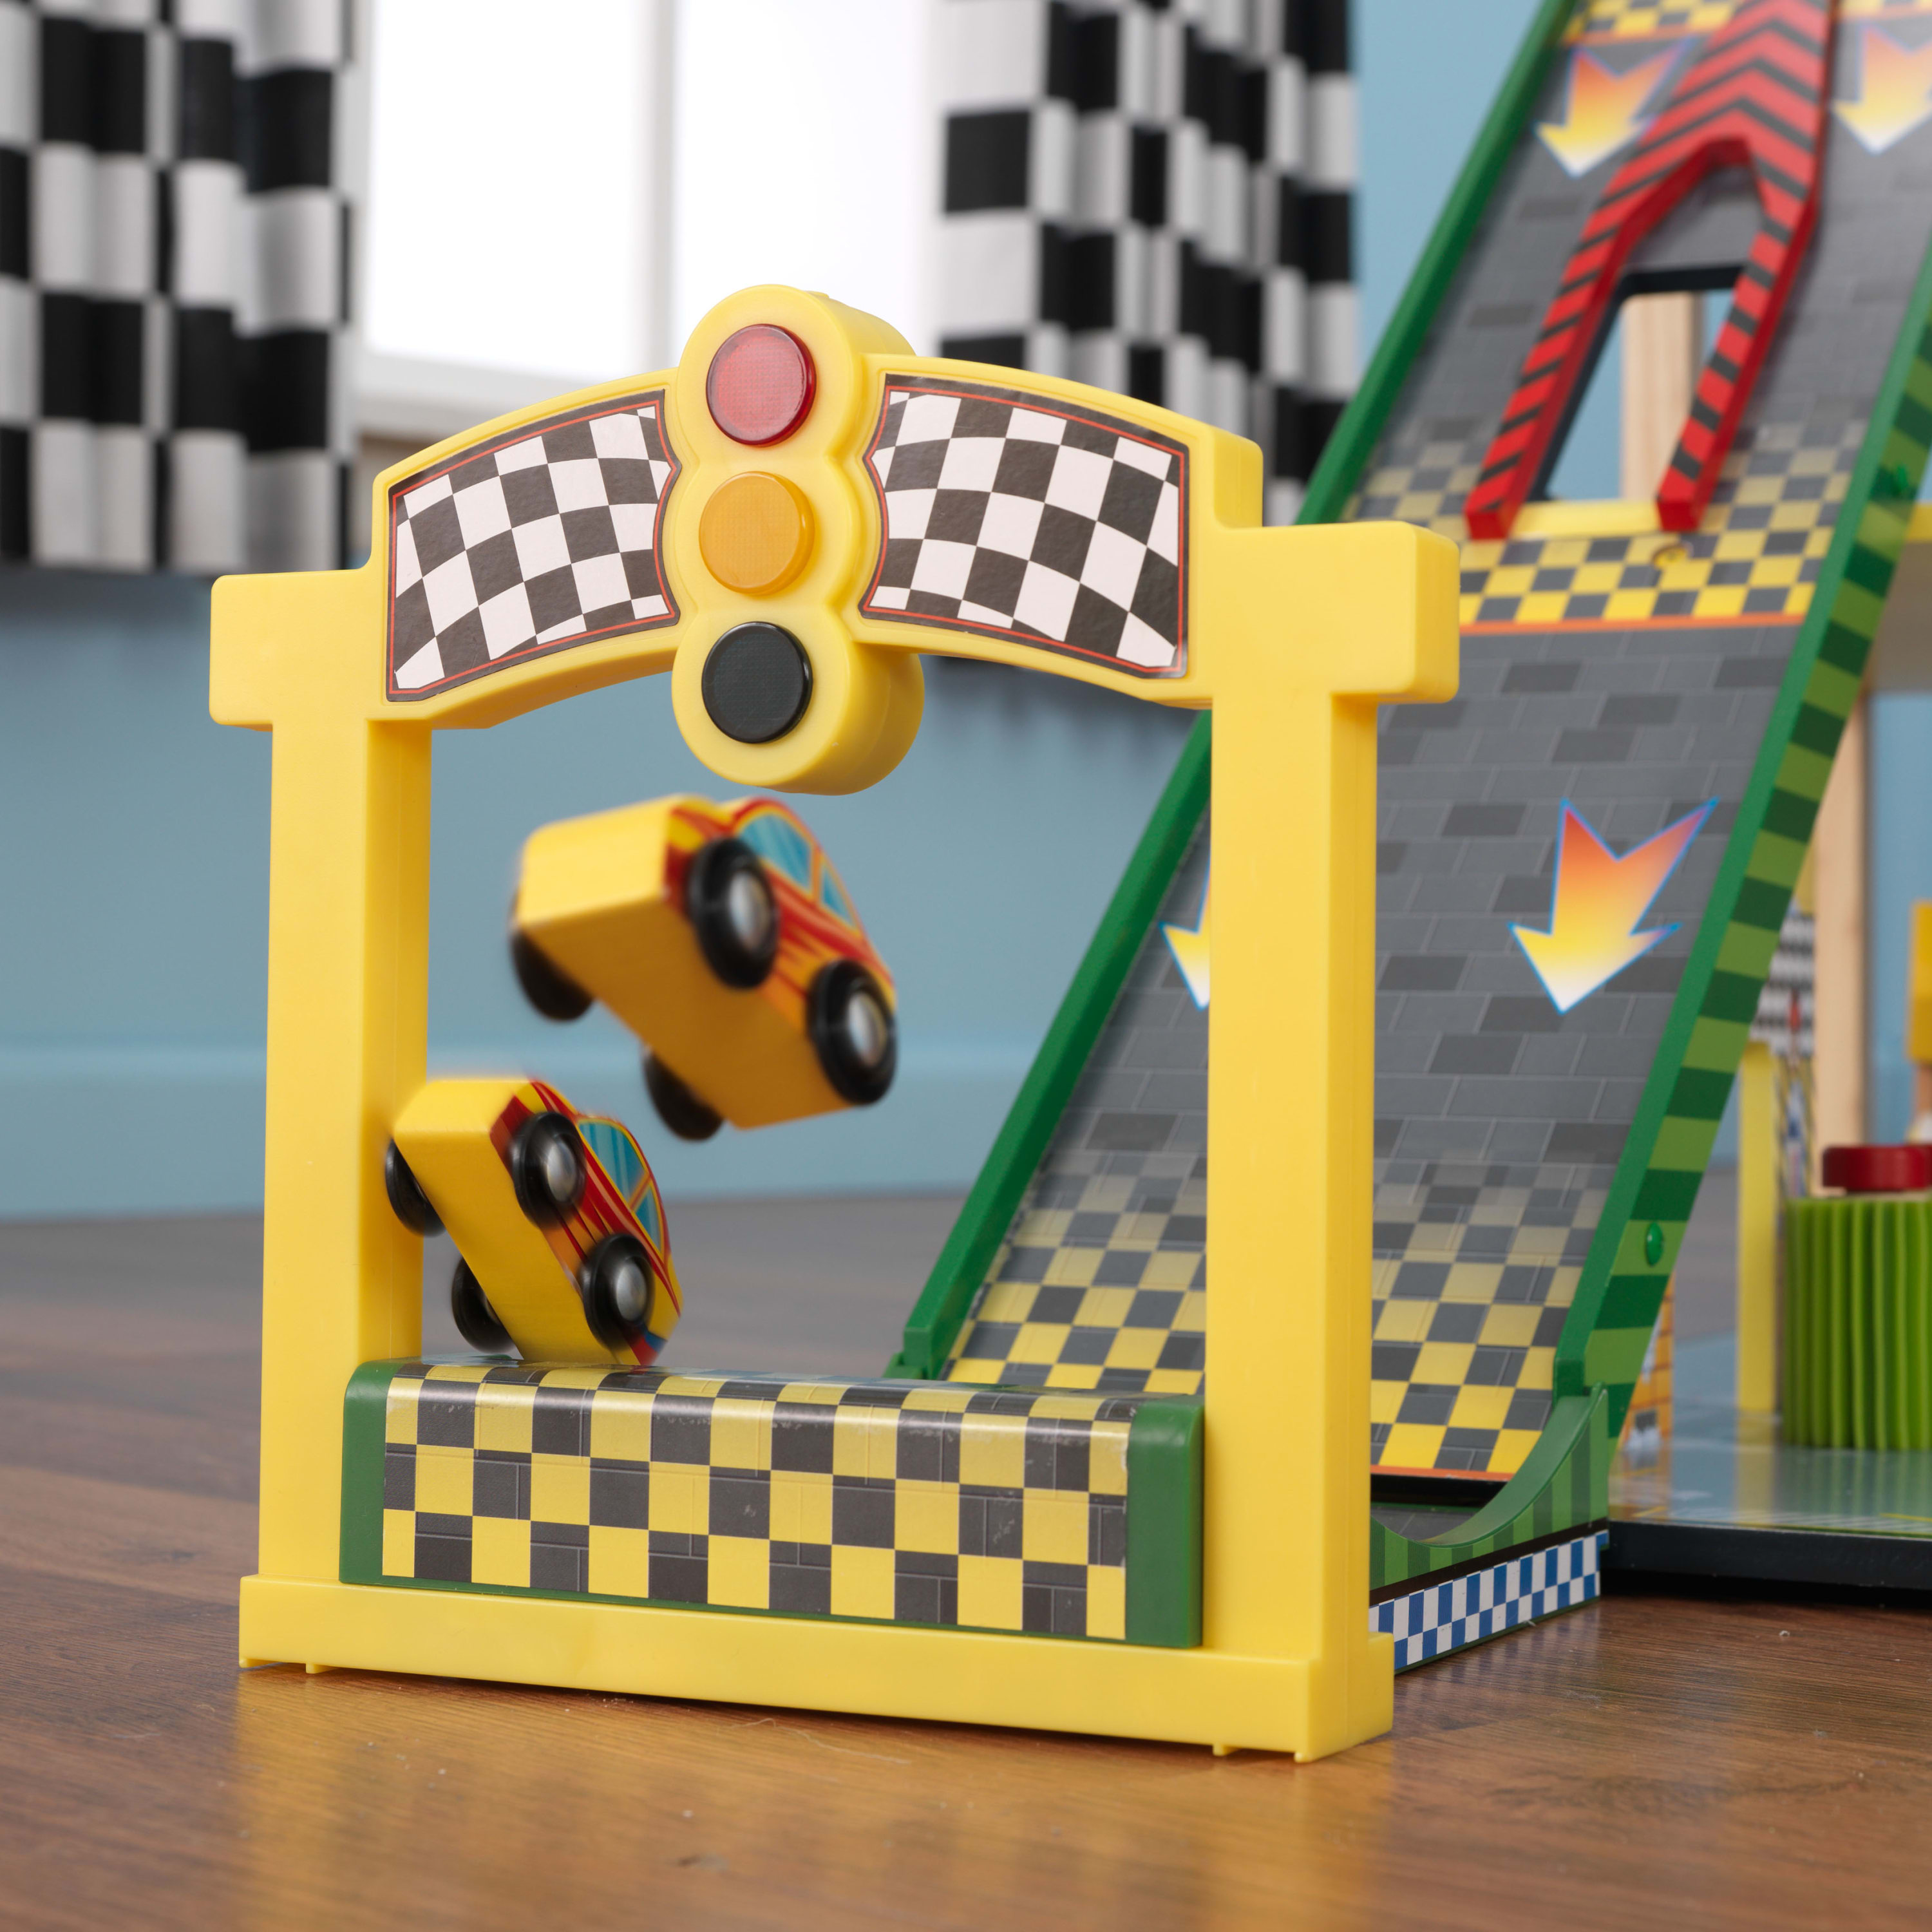 KidKraft Mega Ramp Wooden Racing Play Set with 5 Vehicles. Lights and Moving Elevator - image 3 of 9